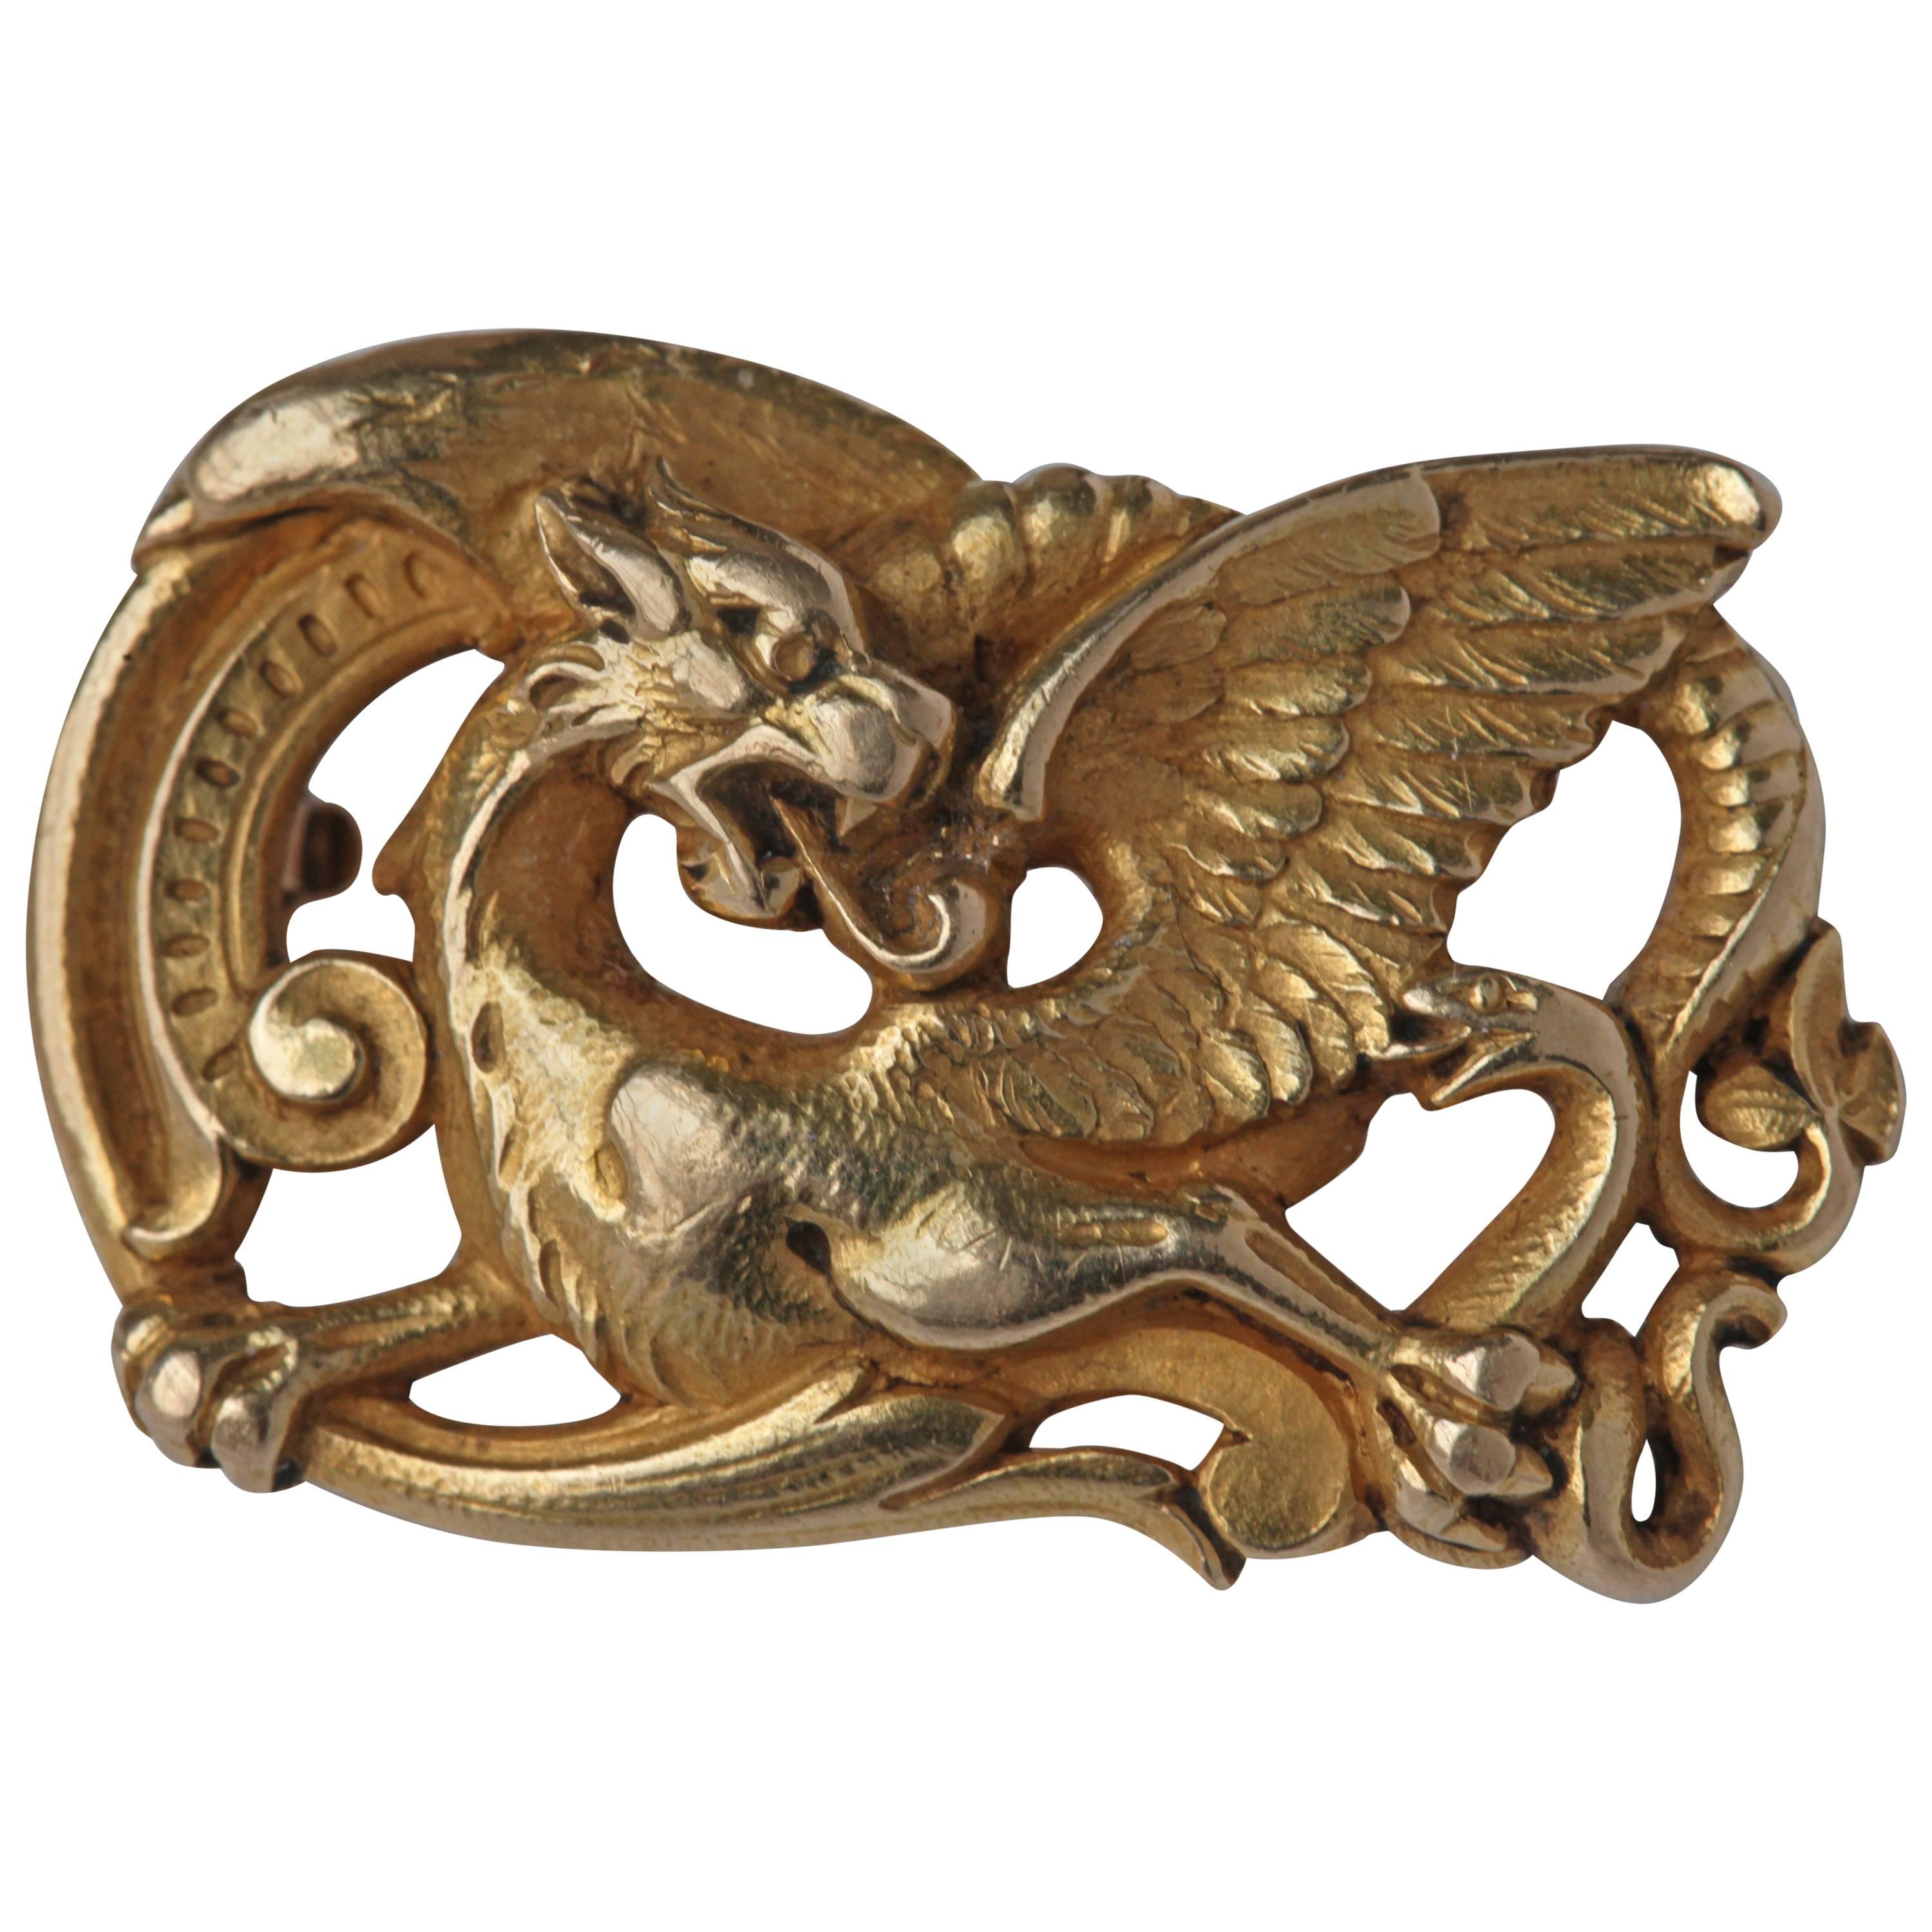 Wièse Gothic Revival Dragon Brooch